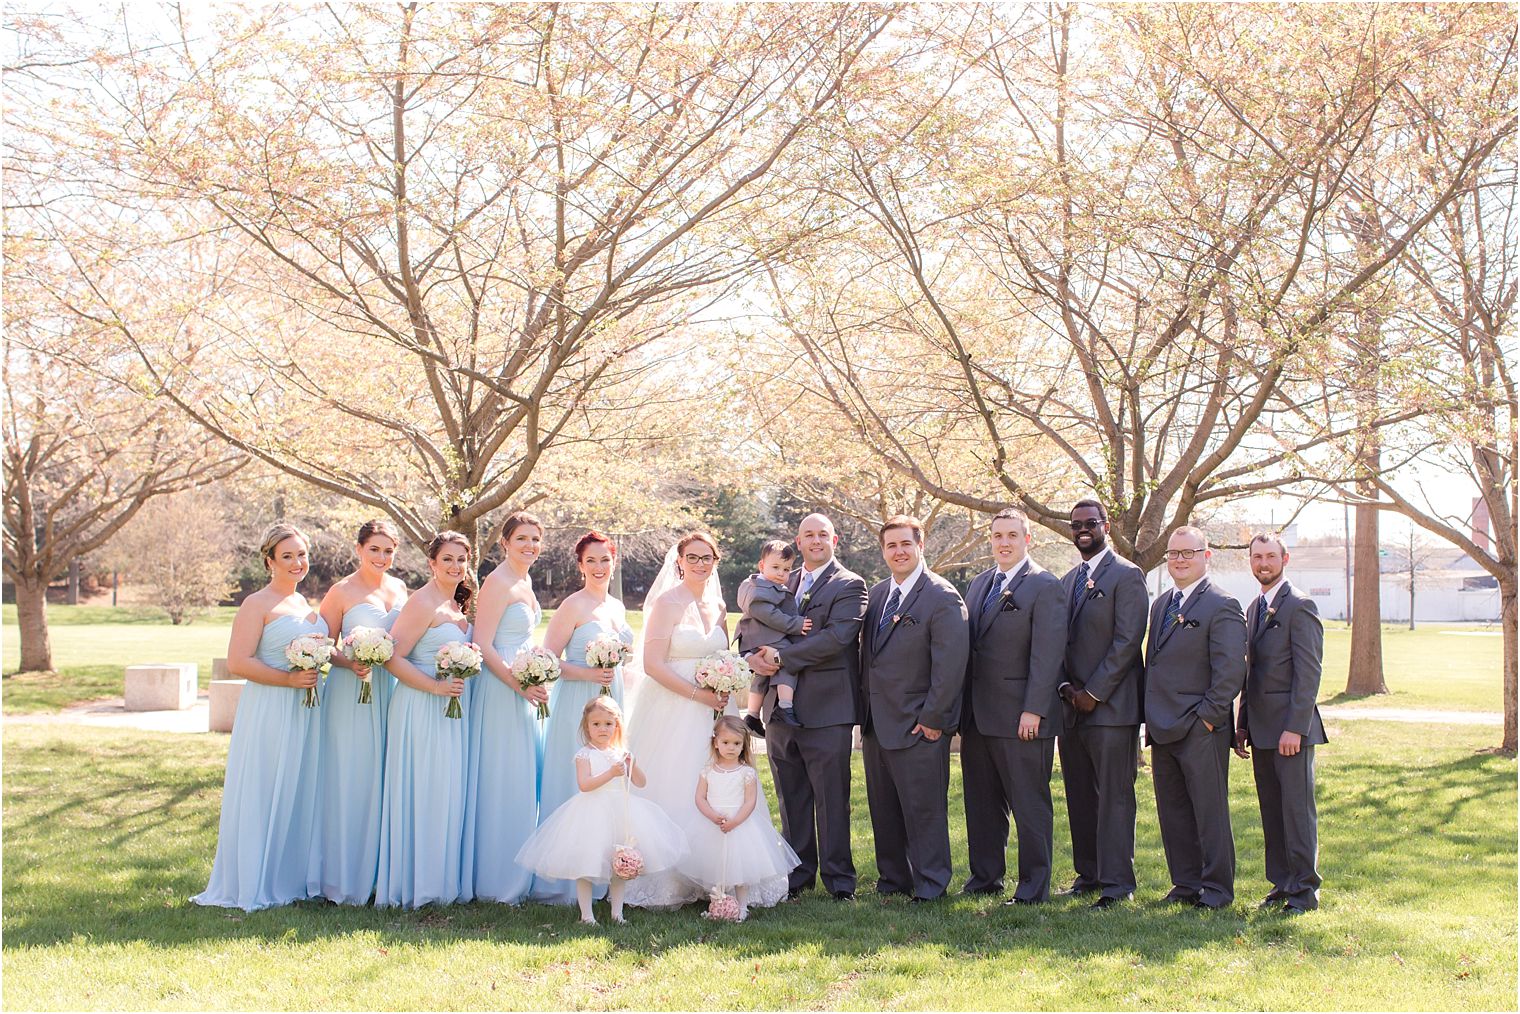 Bridal Party in blue and gray